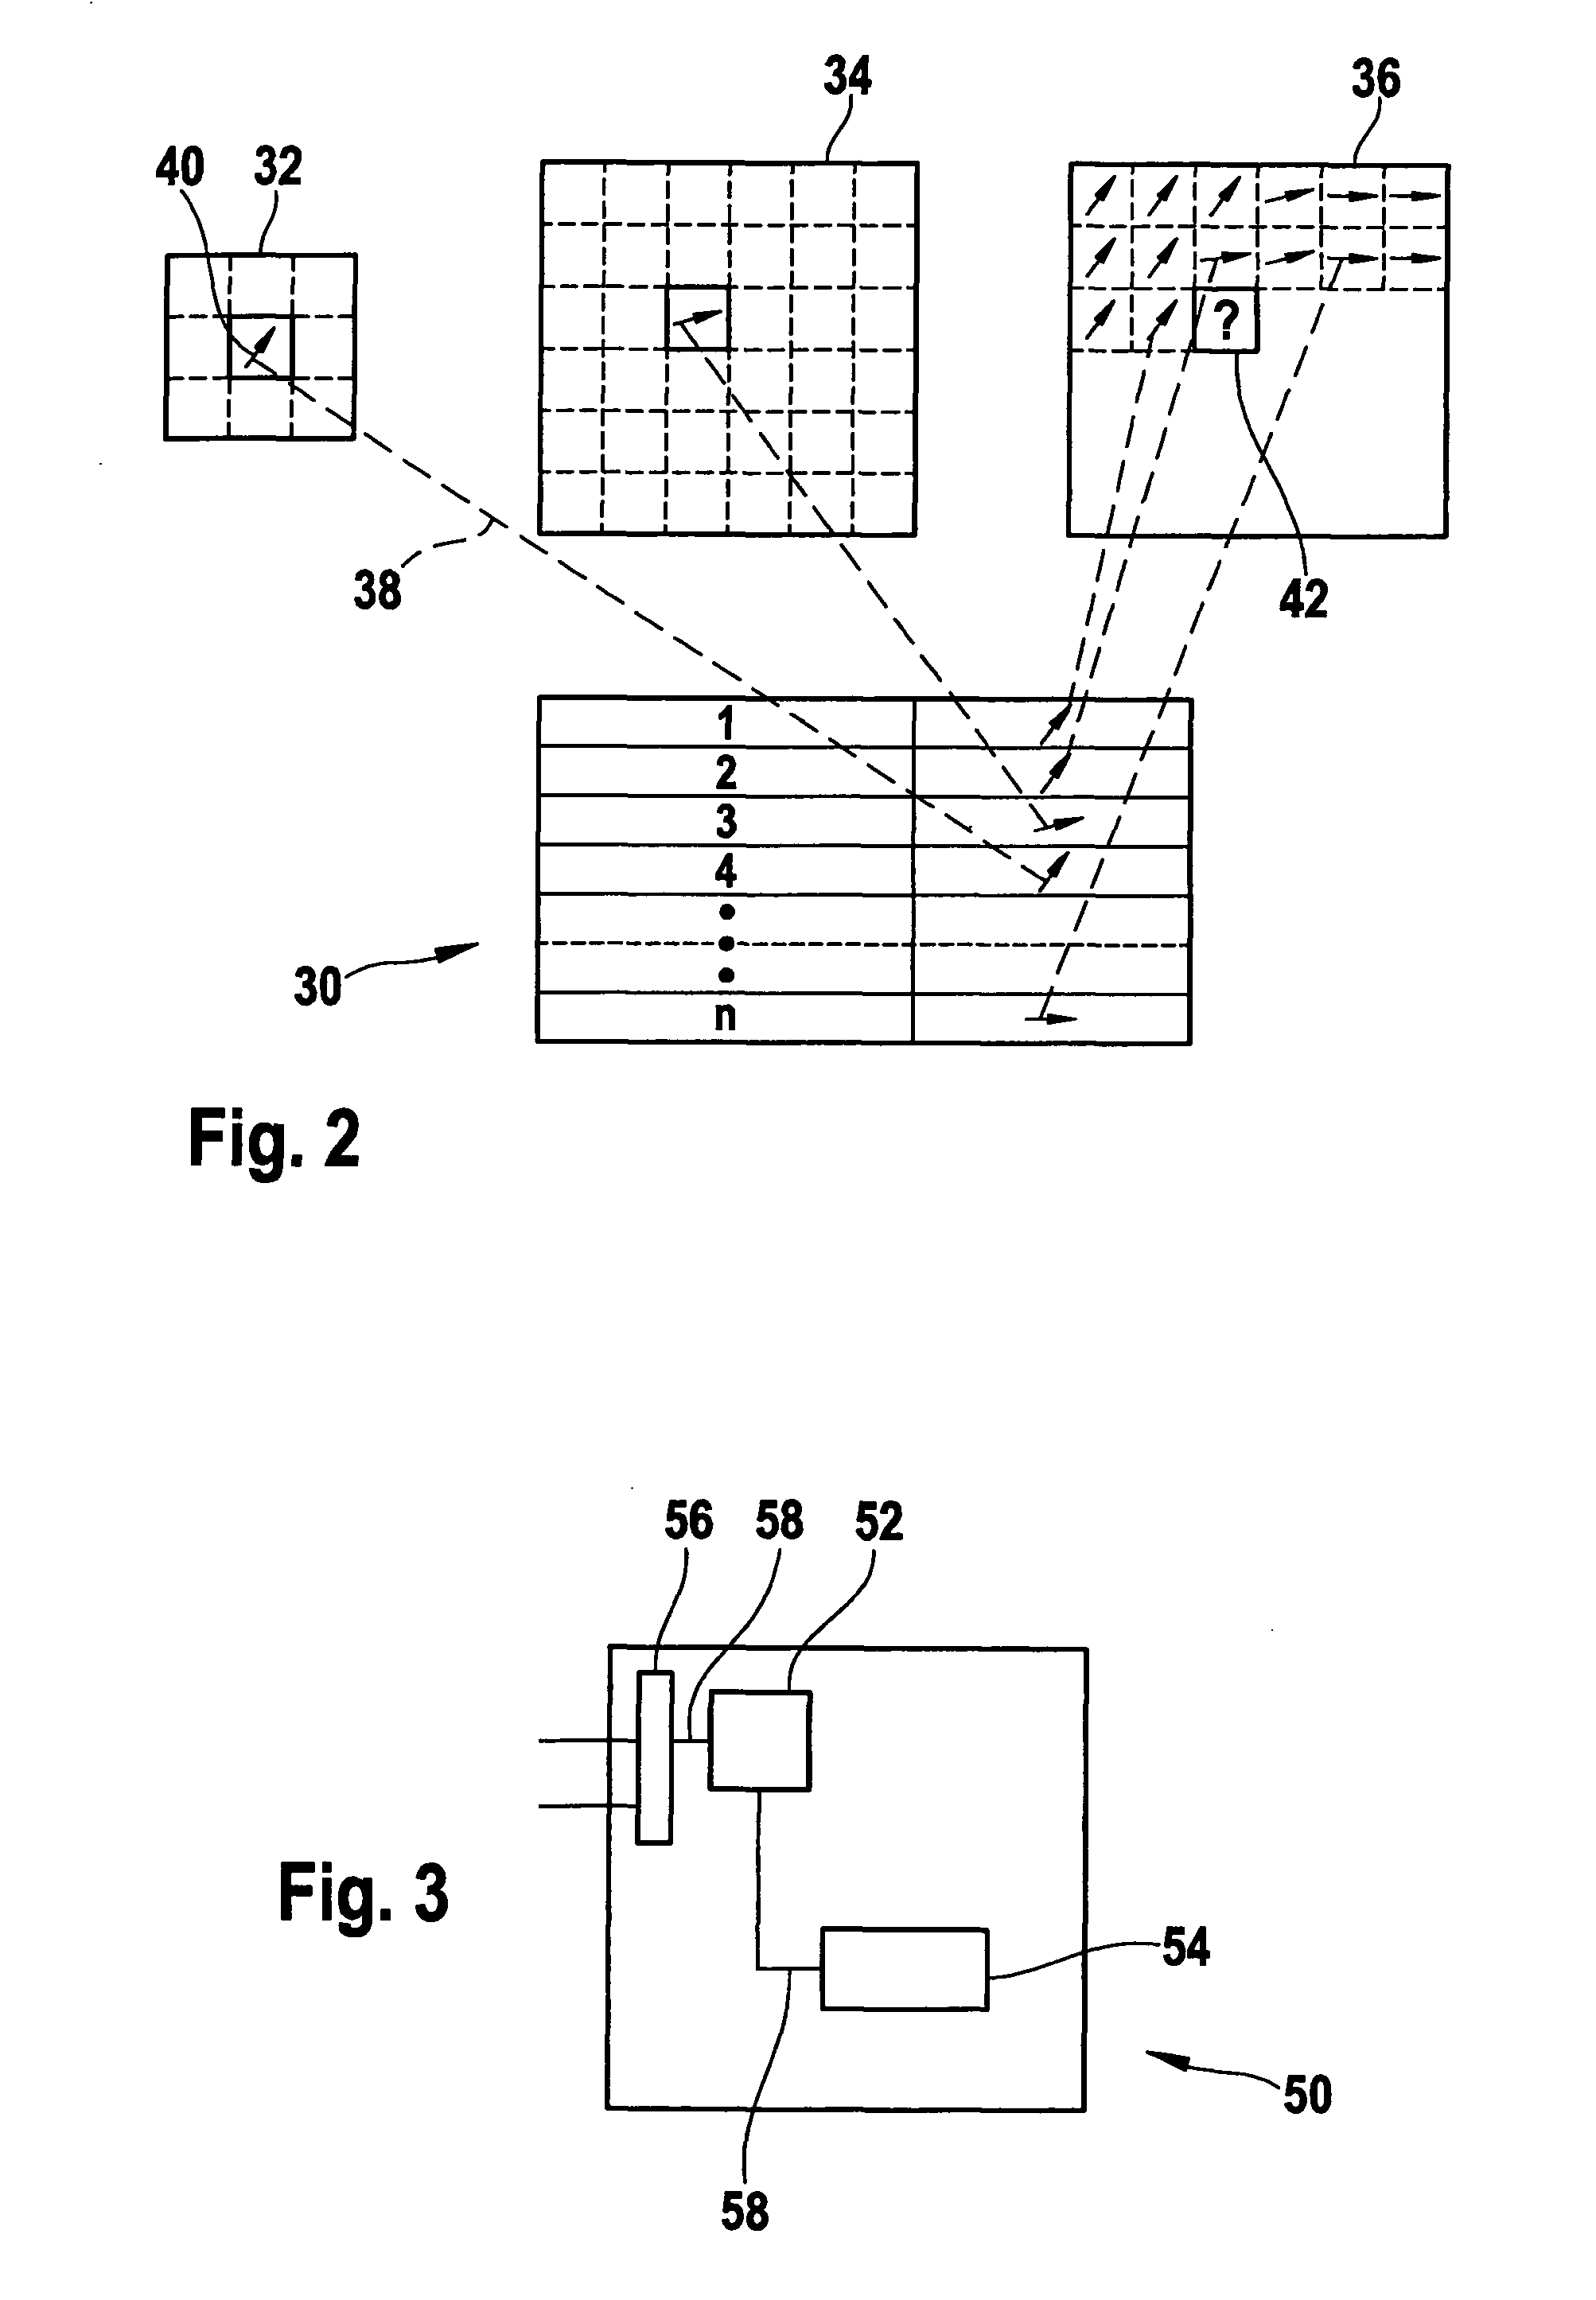 Method for compressing data in a video sequence